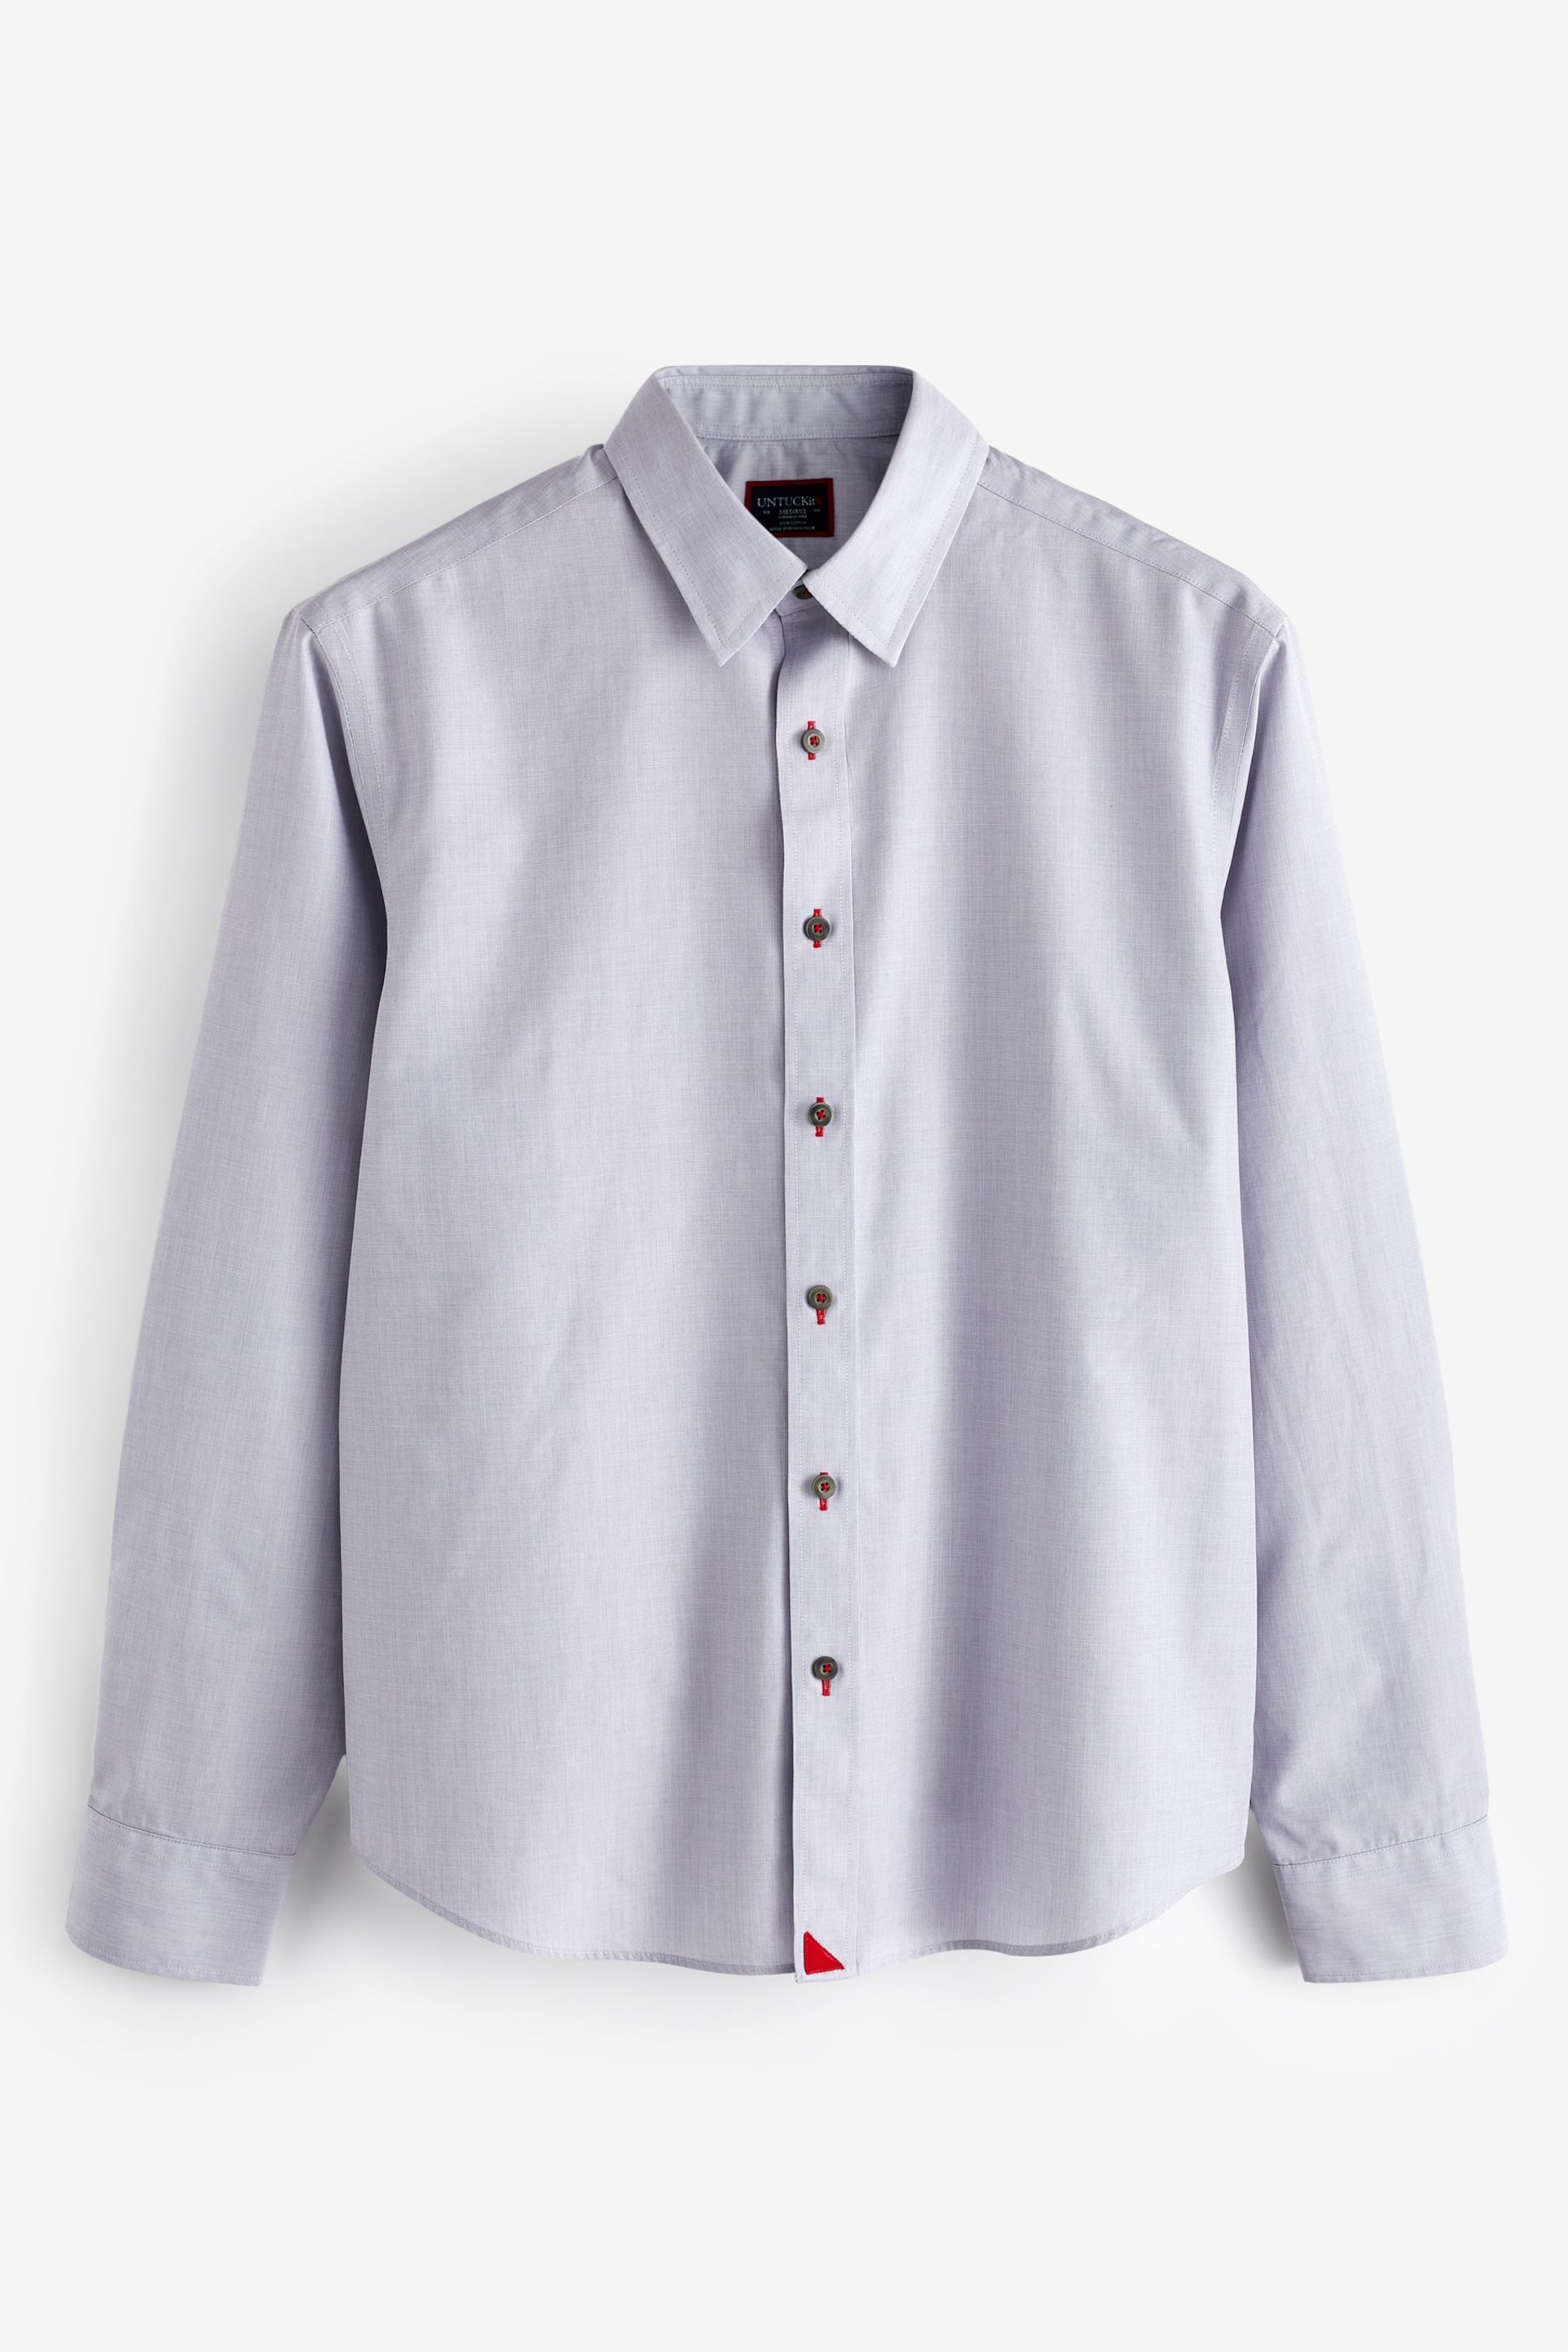 UNTUCKit Purple Wrinkle-Free Relaxed Fit Rubican Shirt - Image 5 of 6